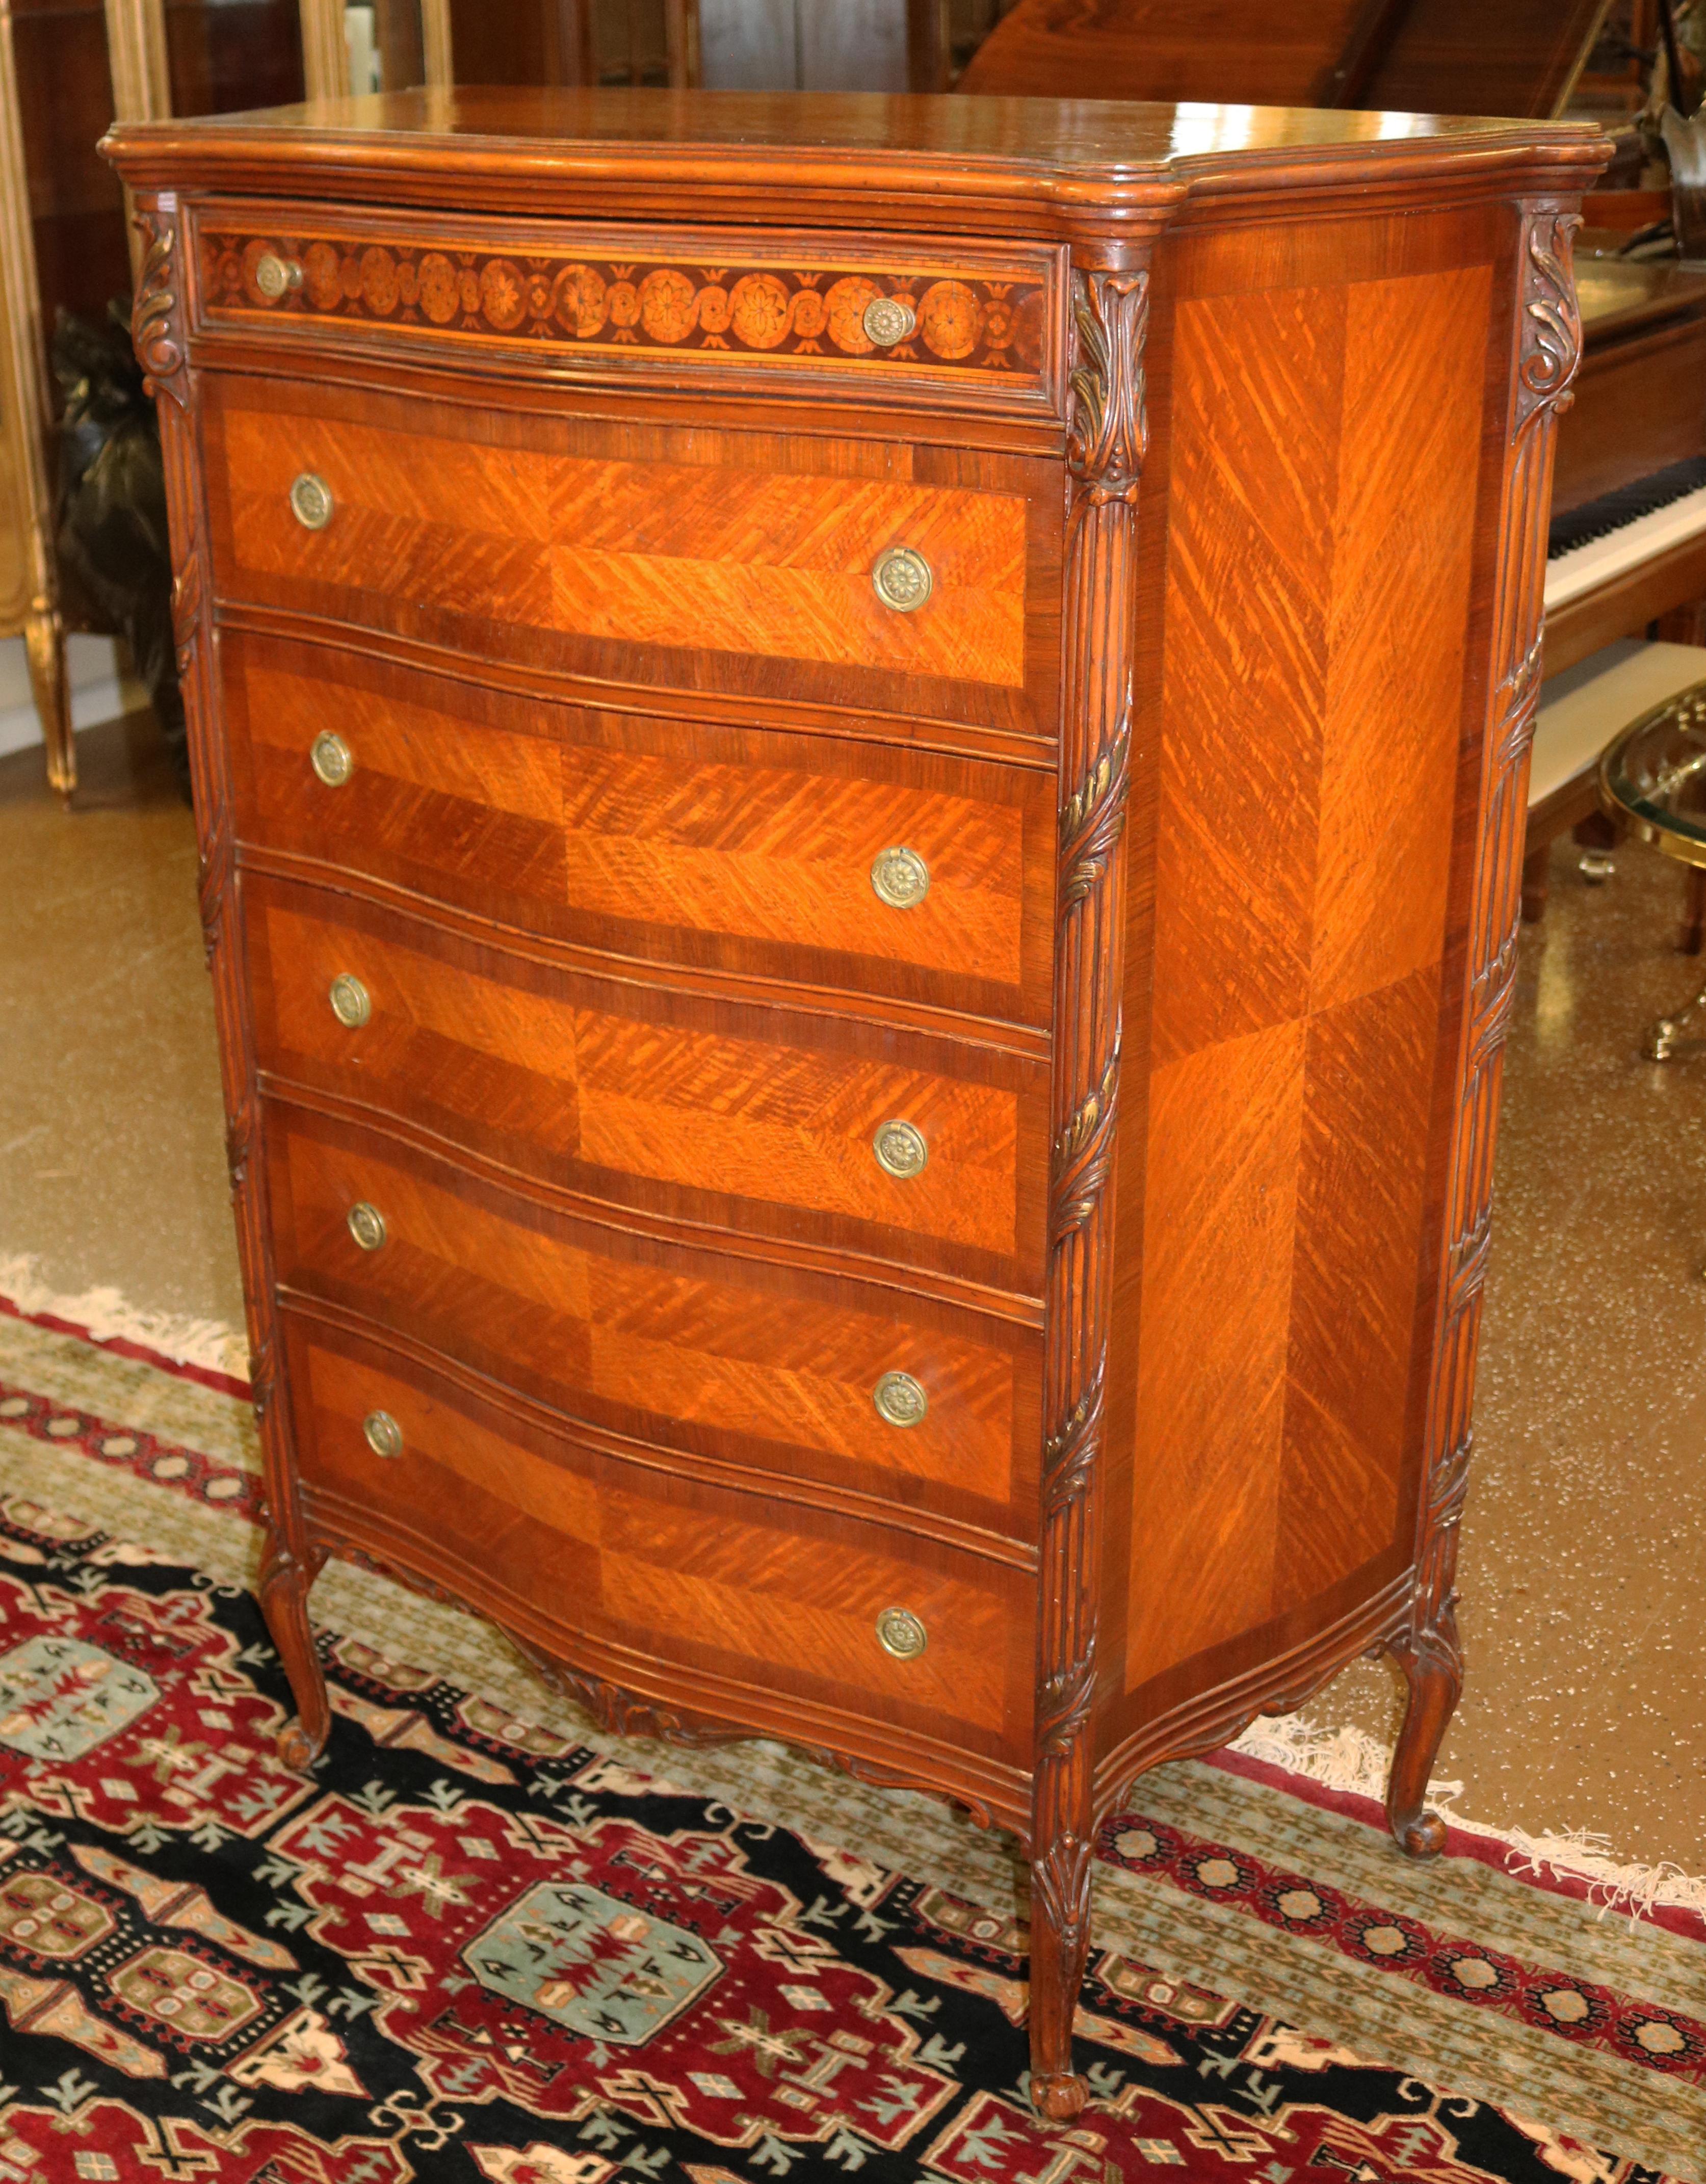 Fabulous French Louis XV Style Inlaid Kingwood High Chest Dresser In Good Condition For Sale In Long Branch, NJ